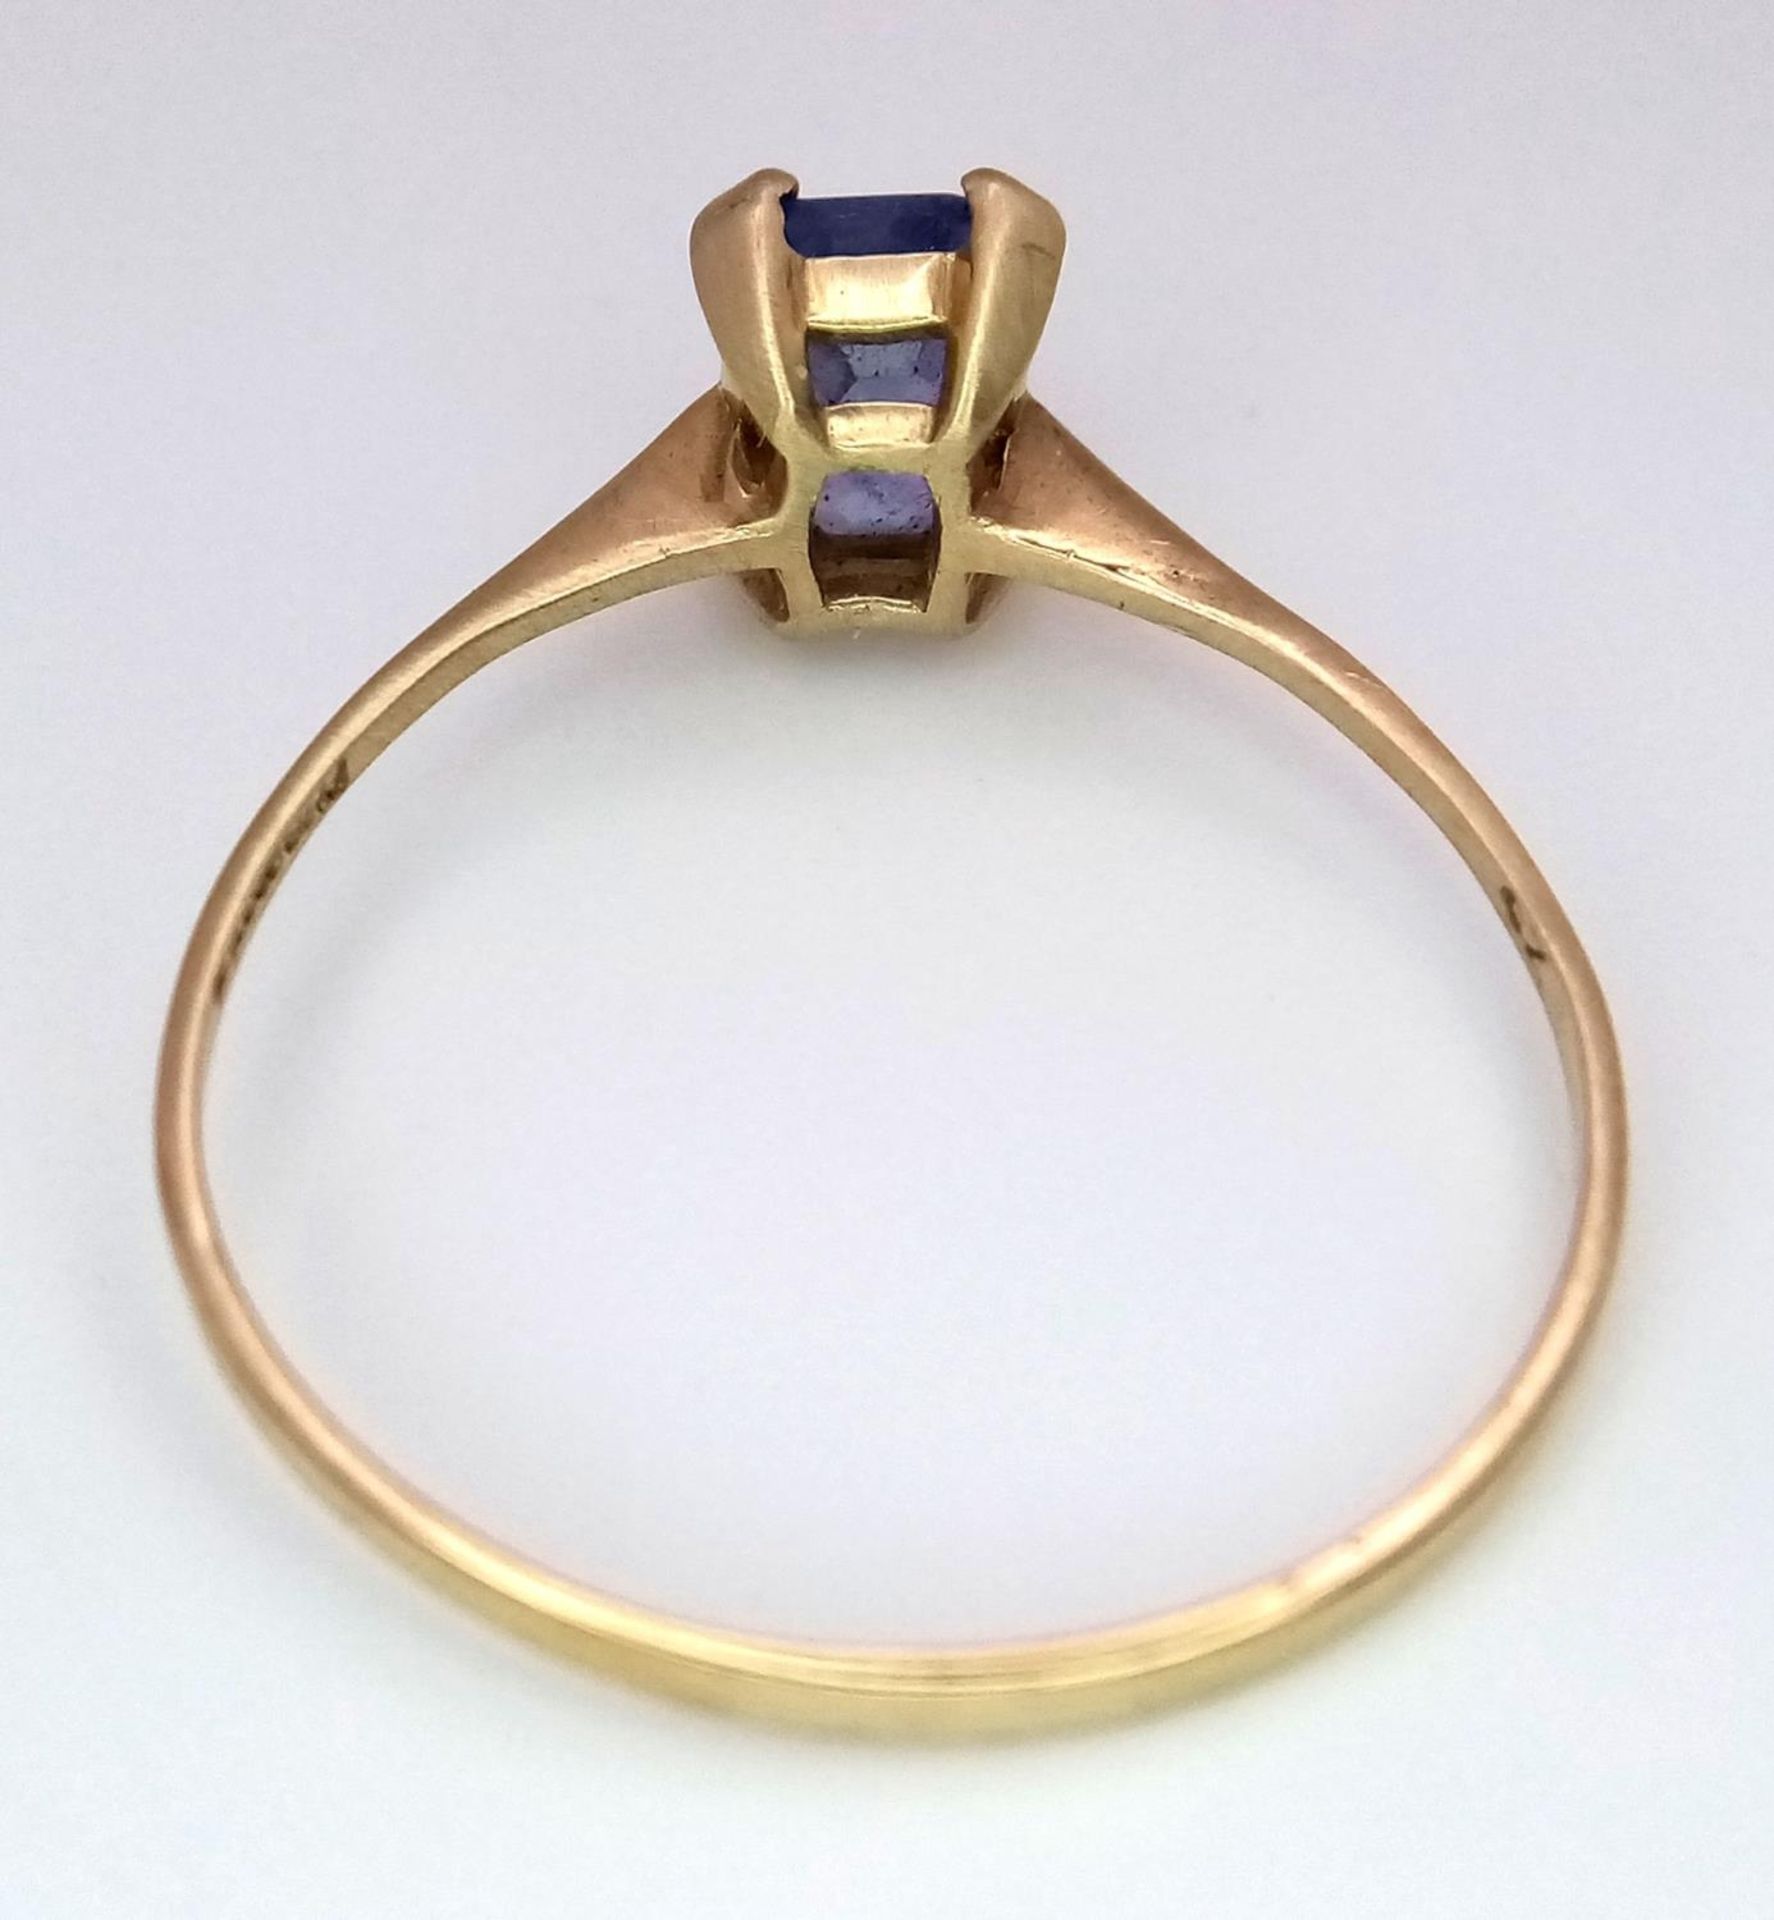 A 9K Yellow Gold 1ct Sapphire Solitaire Ring. Size U, 1.23g total weight. - Image 4 of 5